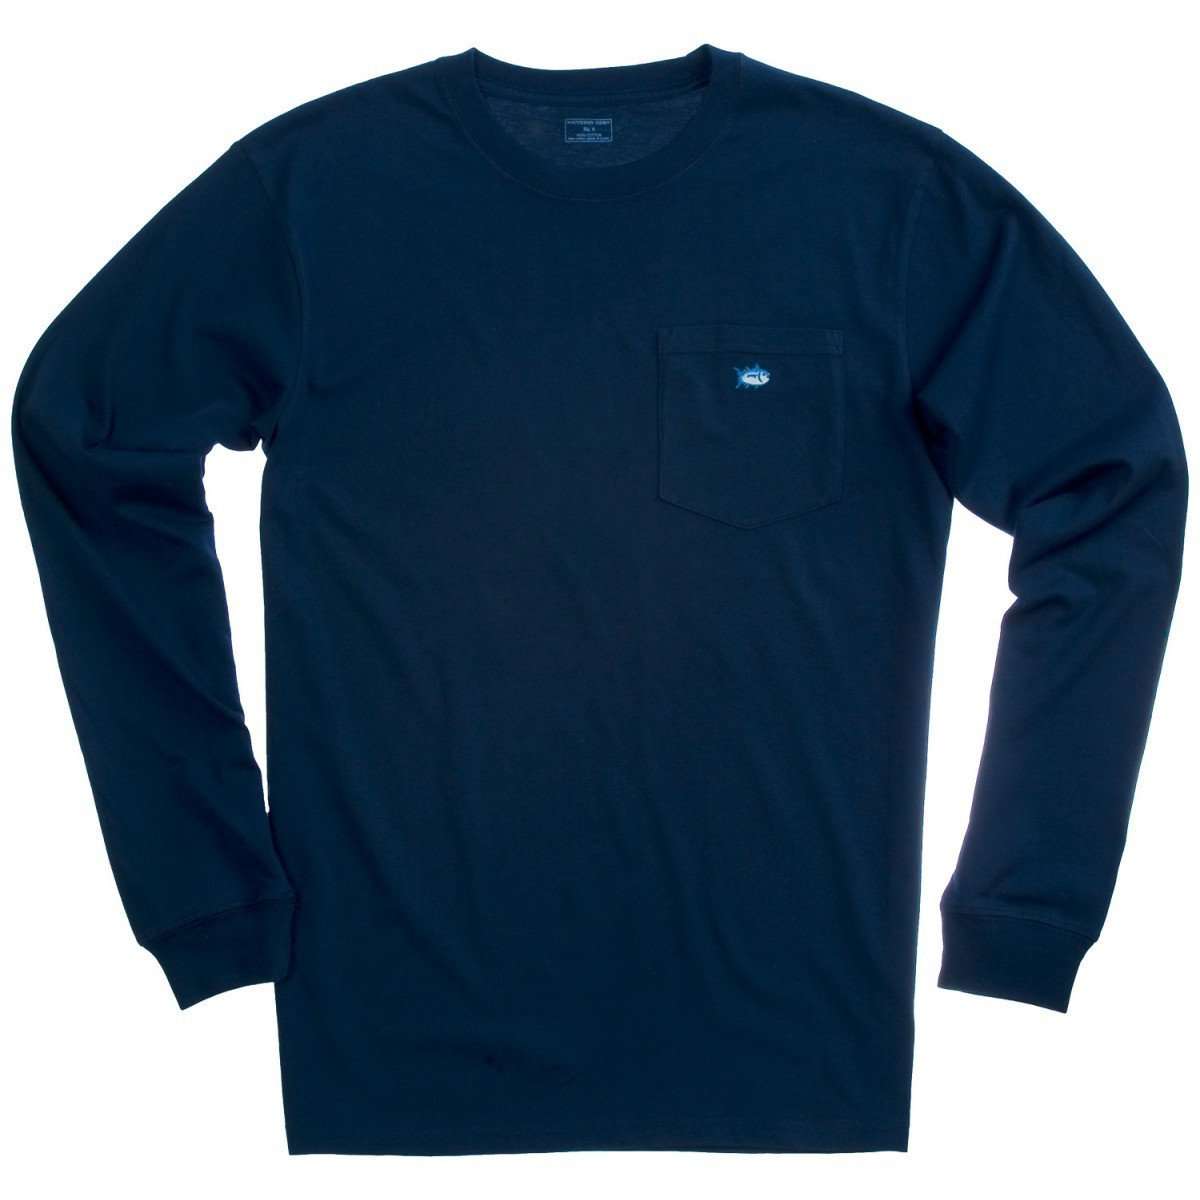 Long Sleeve Embroidered Pocket Tee in Navy by Southern Tide - Country Club Prep